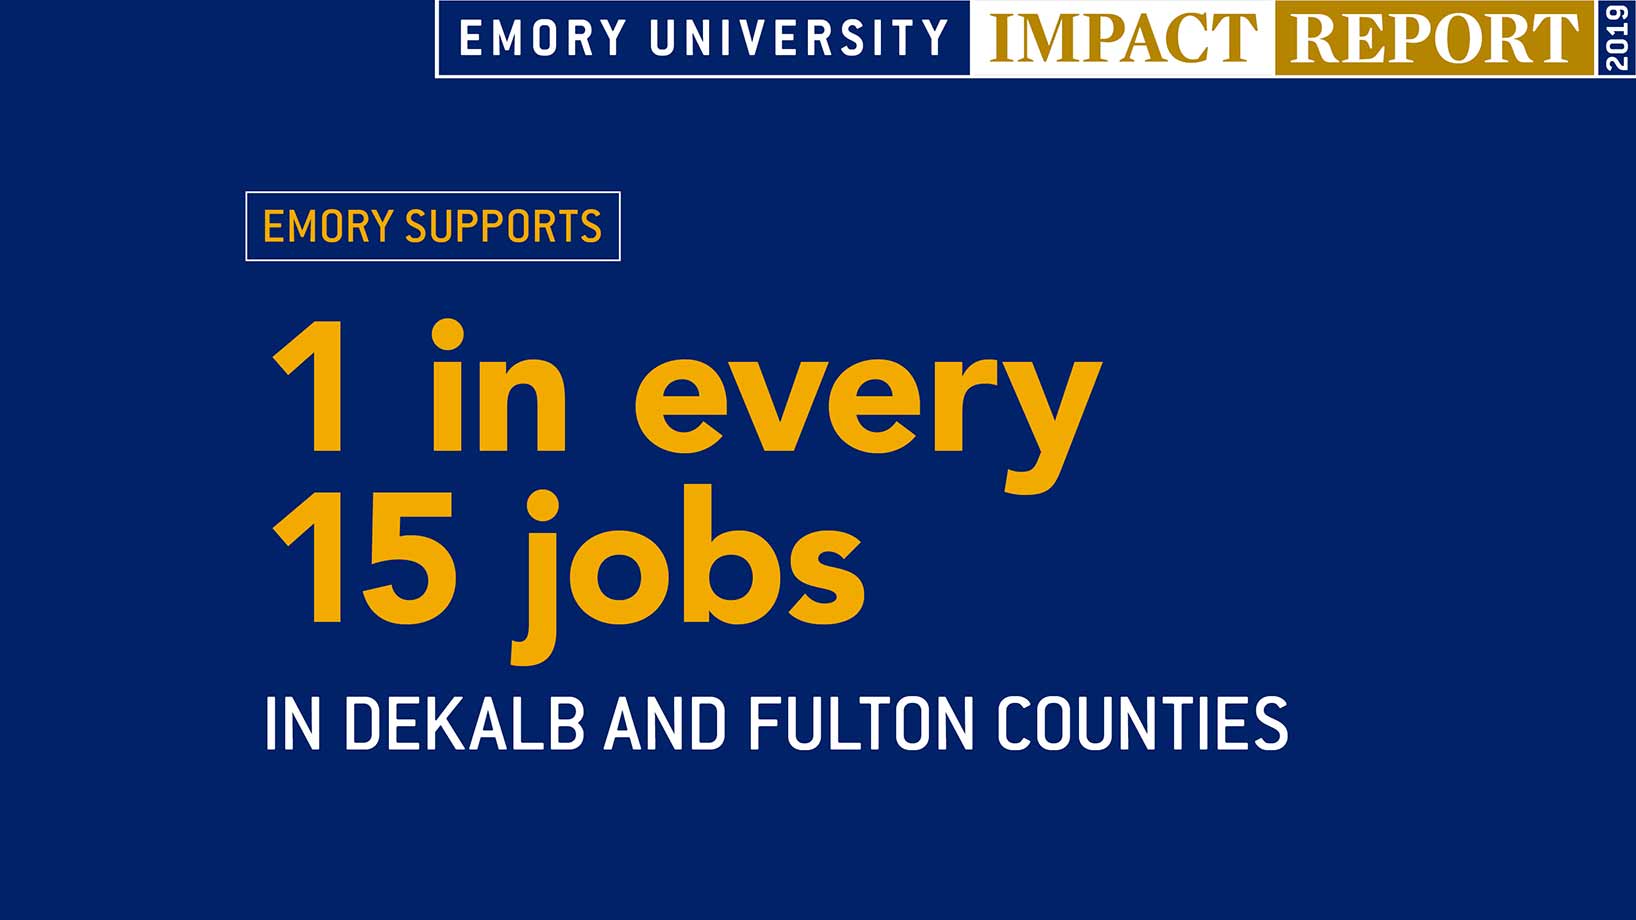 Emory supports 1 in every 15 jobs in Dekalb and Fulton counties